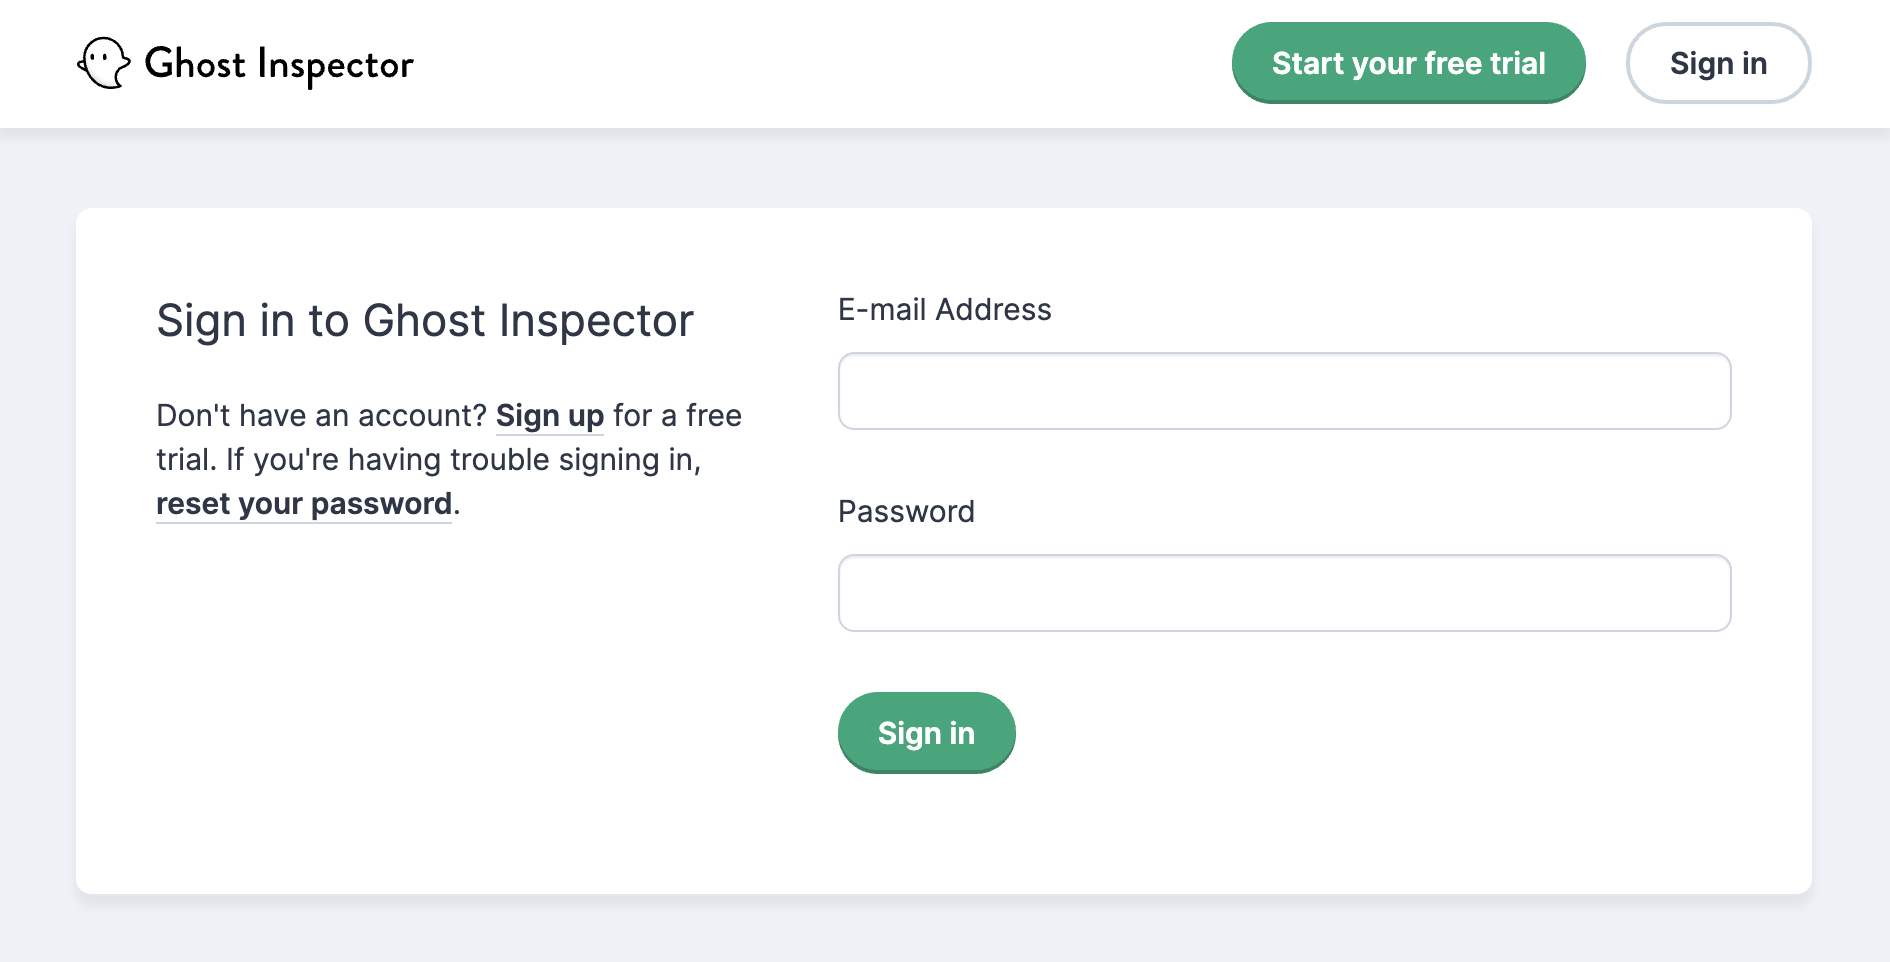 Log into Ghost Inspector